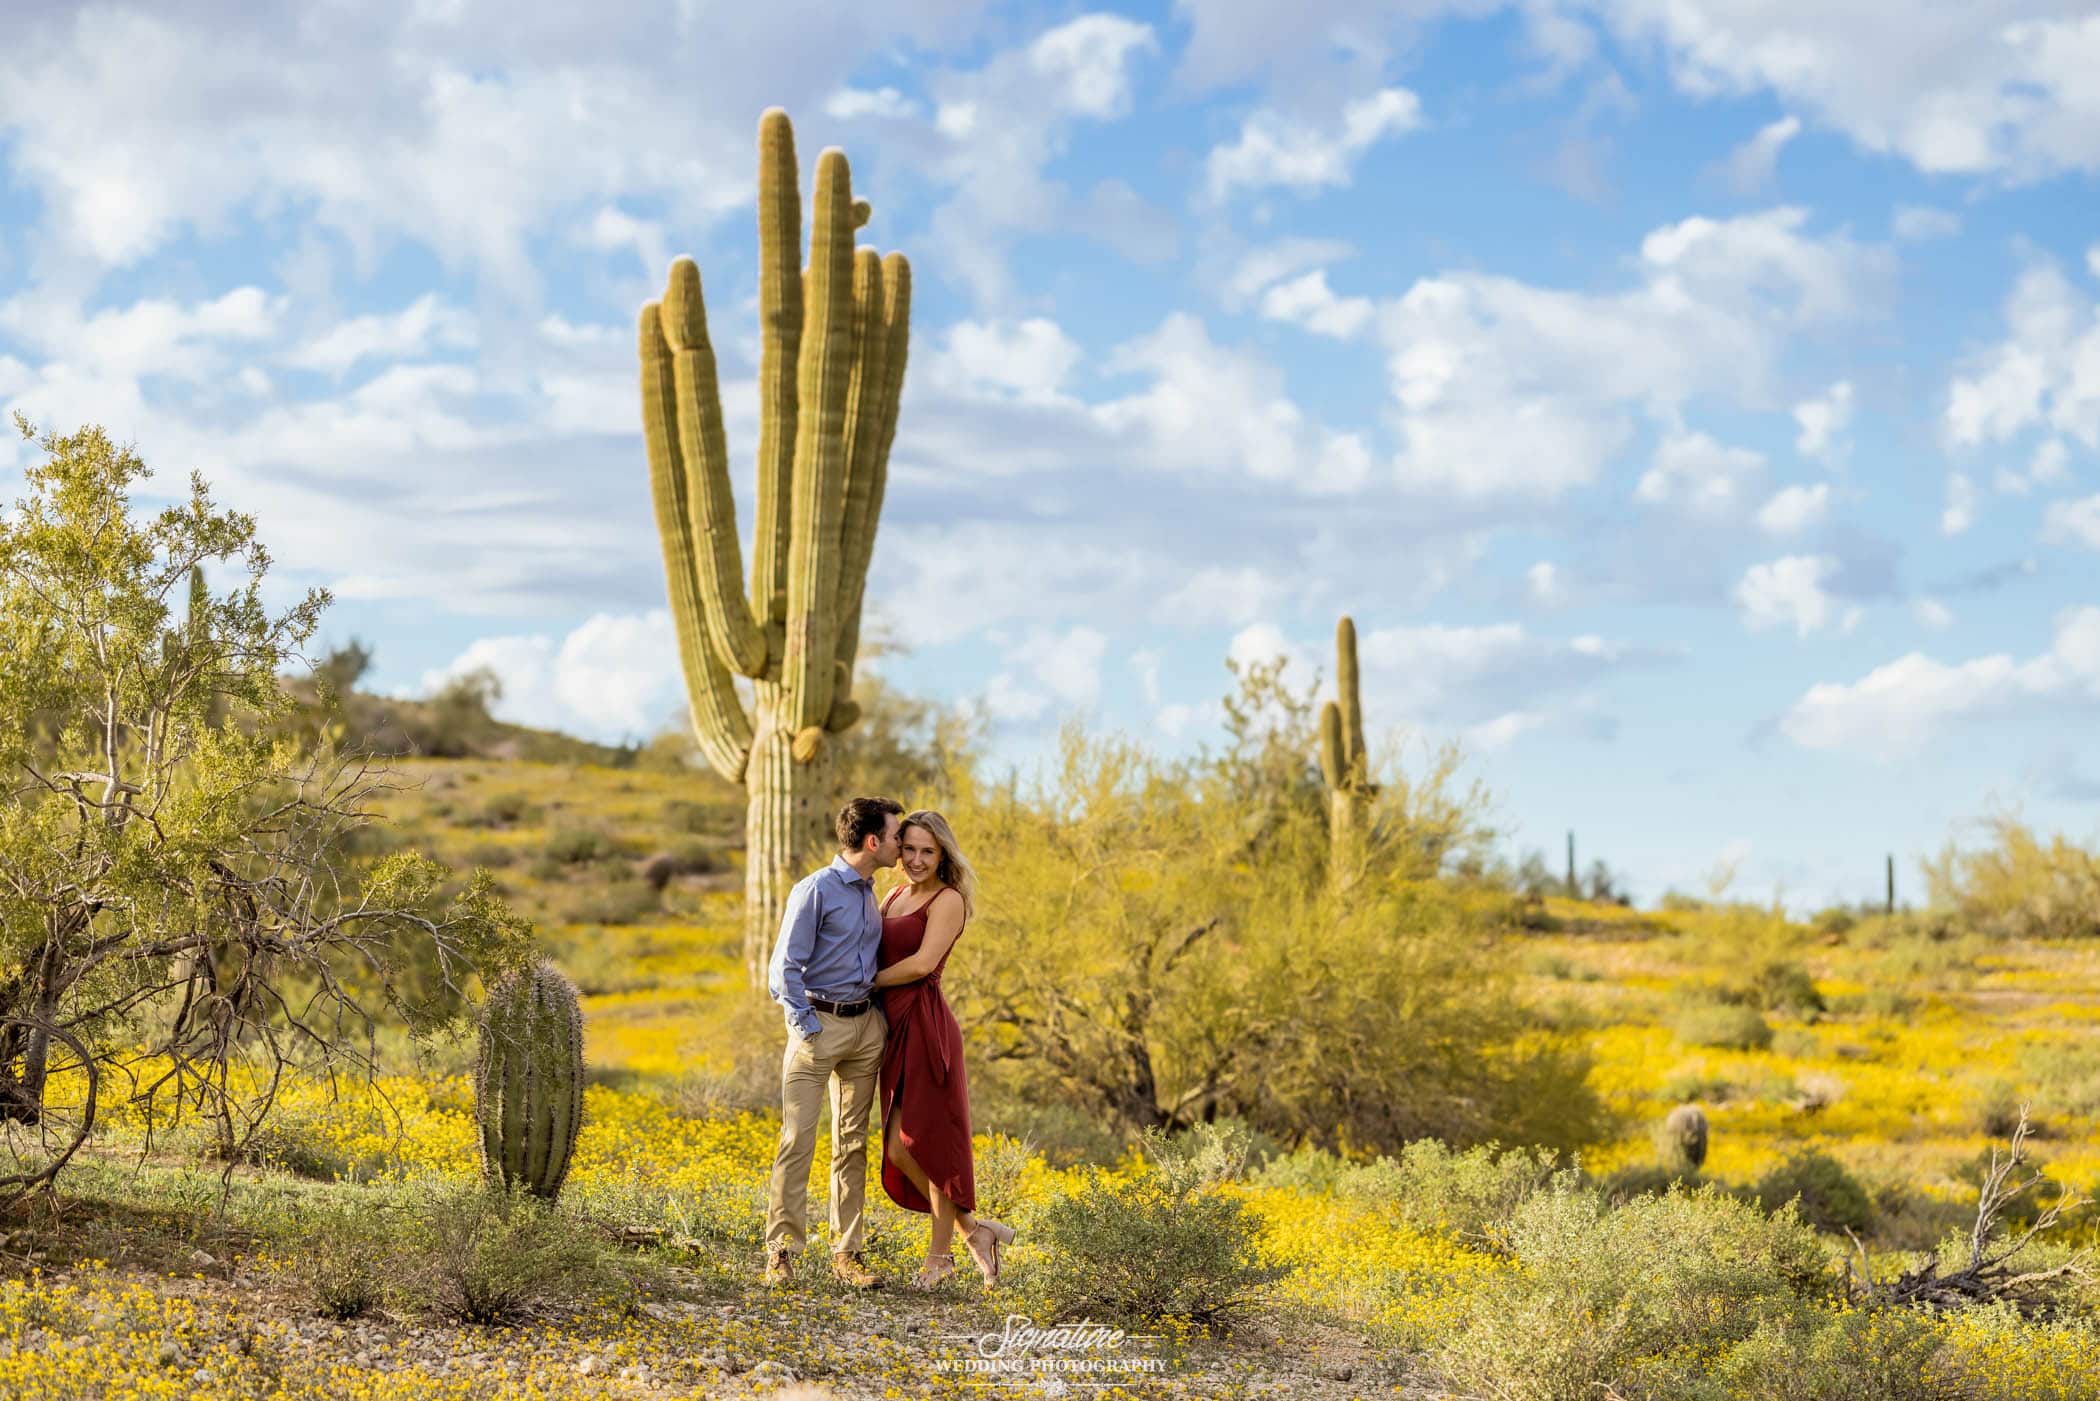 Man kissing woman's cheek in front of cactus